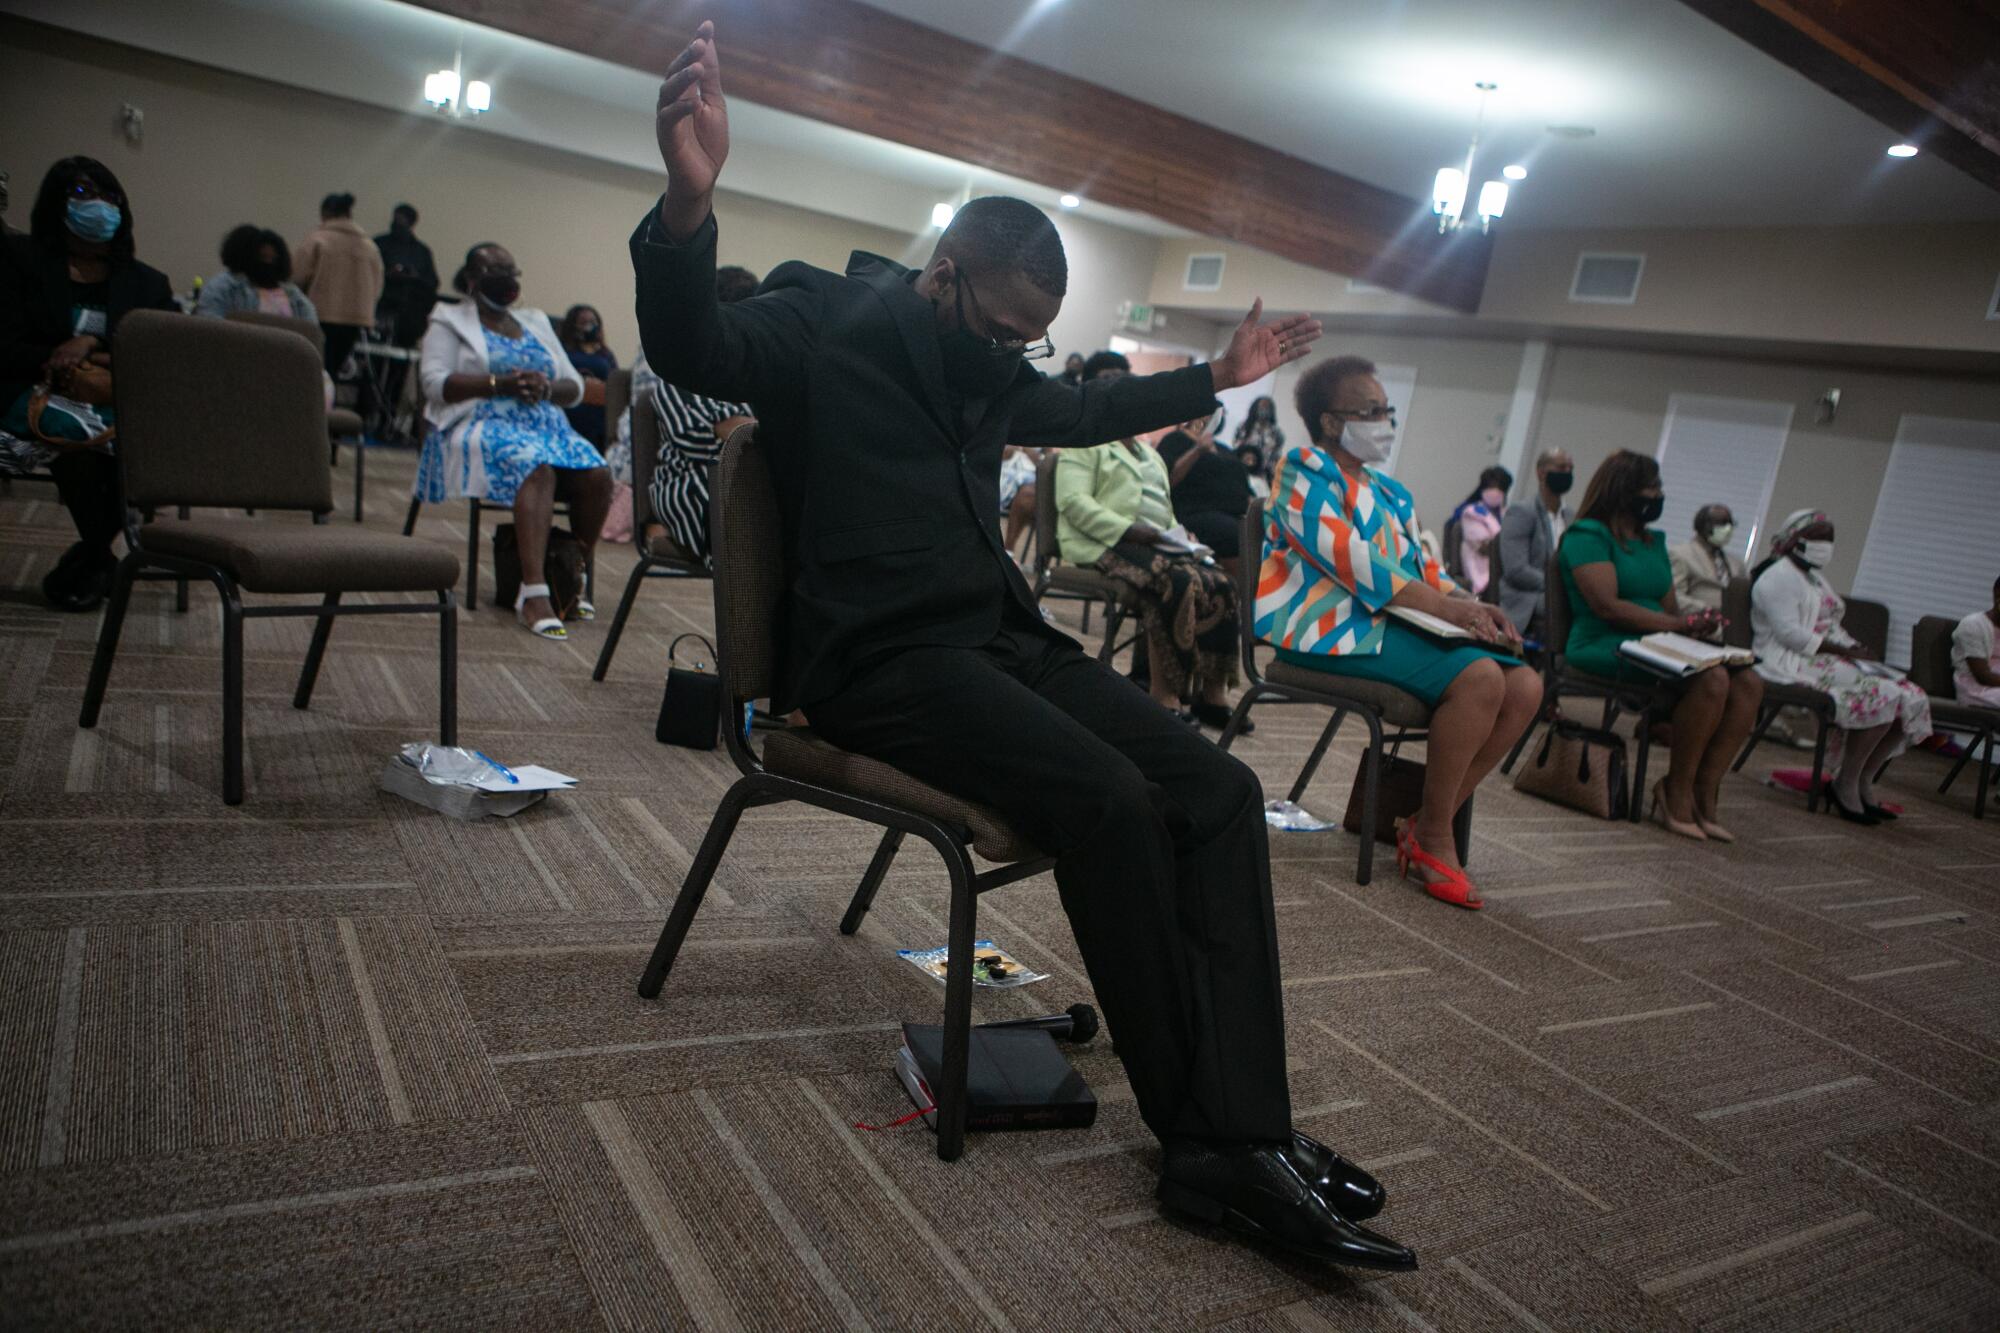 A church minister with hands raised 